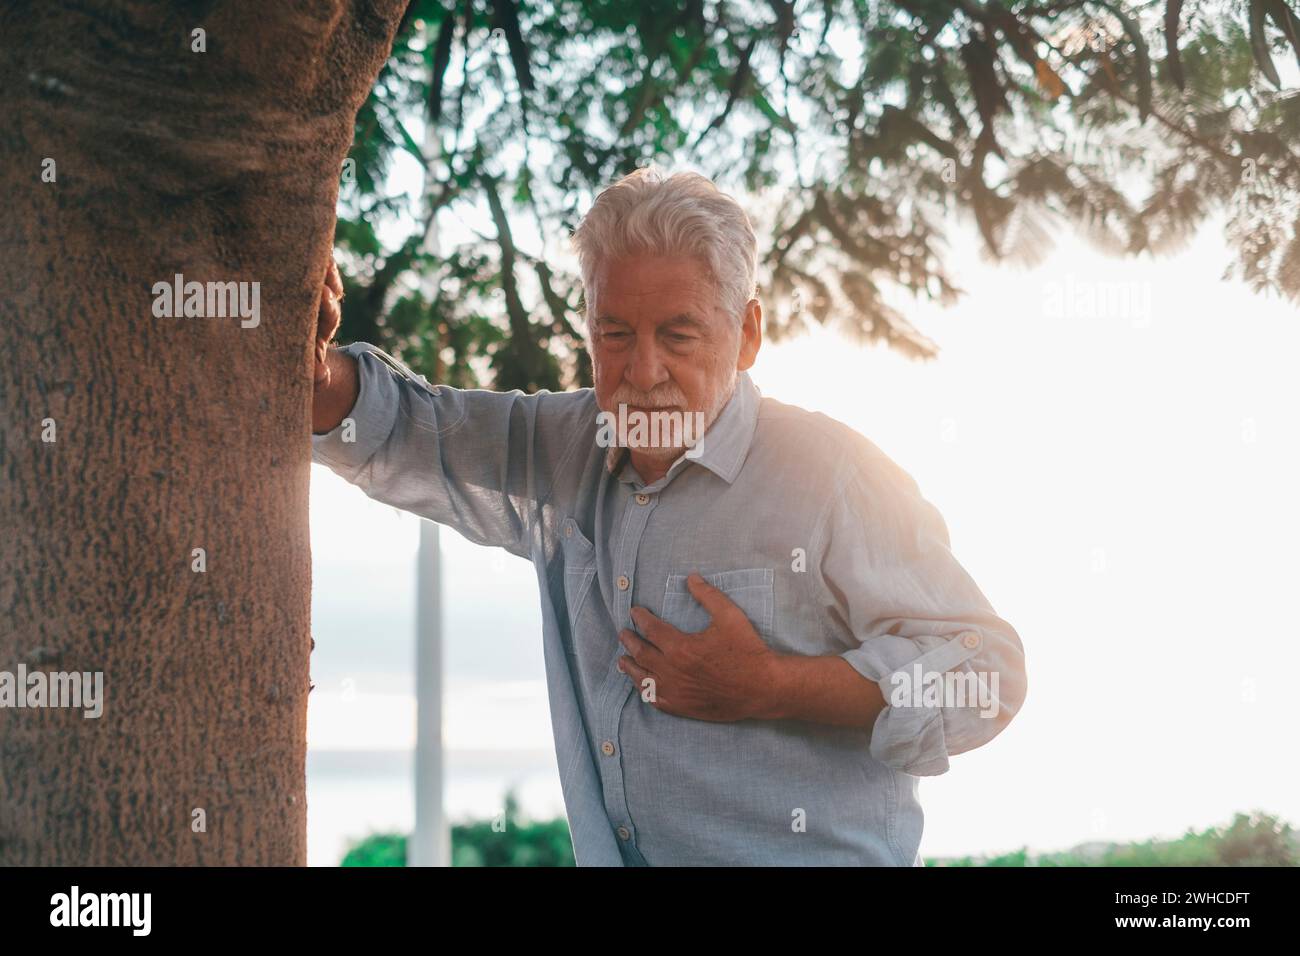 Head shot close up portrait sick old man feeling bad touching his chest at the park. Tired mature male resting next to tree. Stock Photo